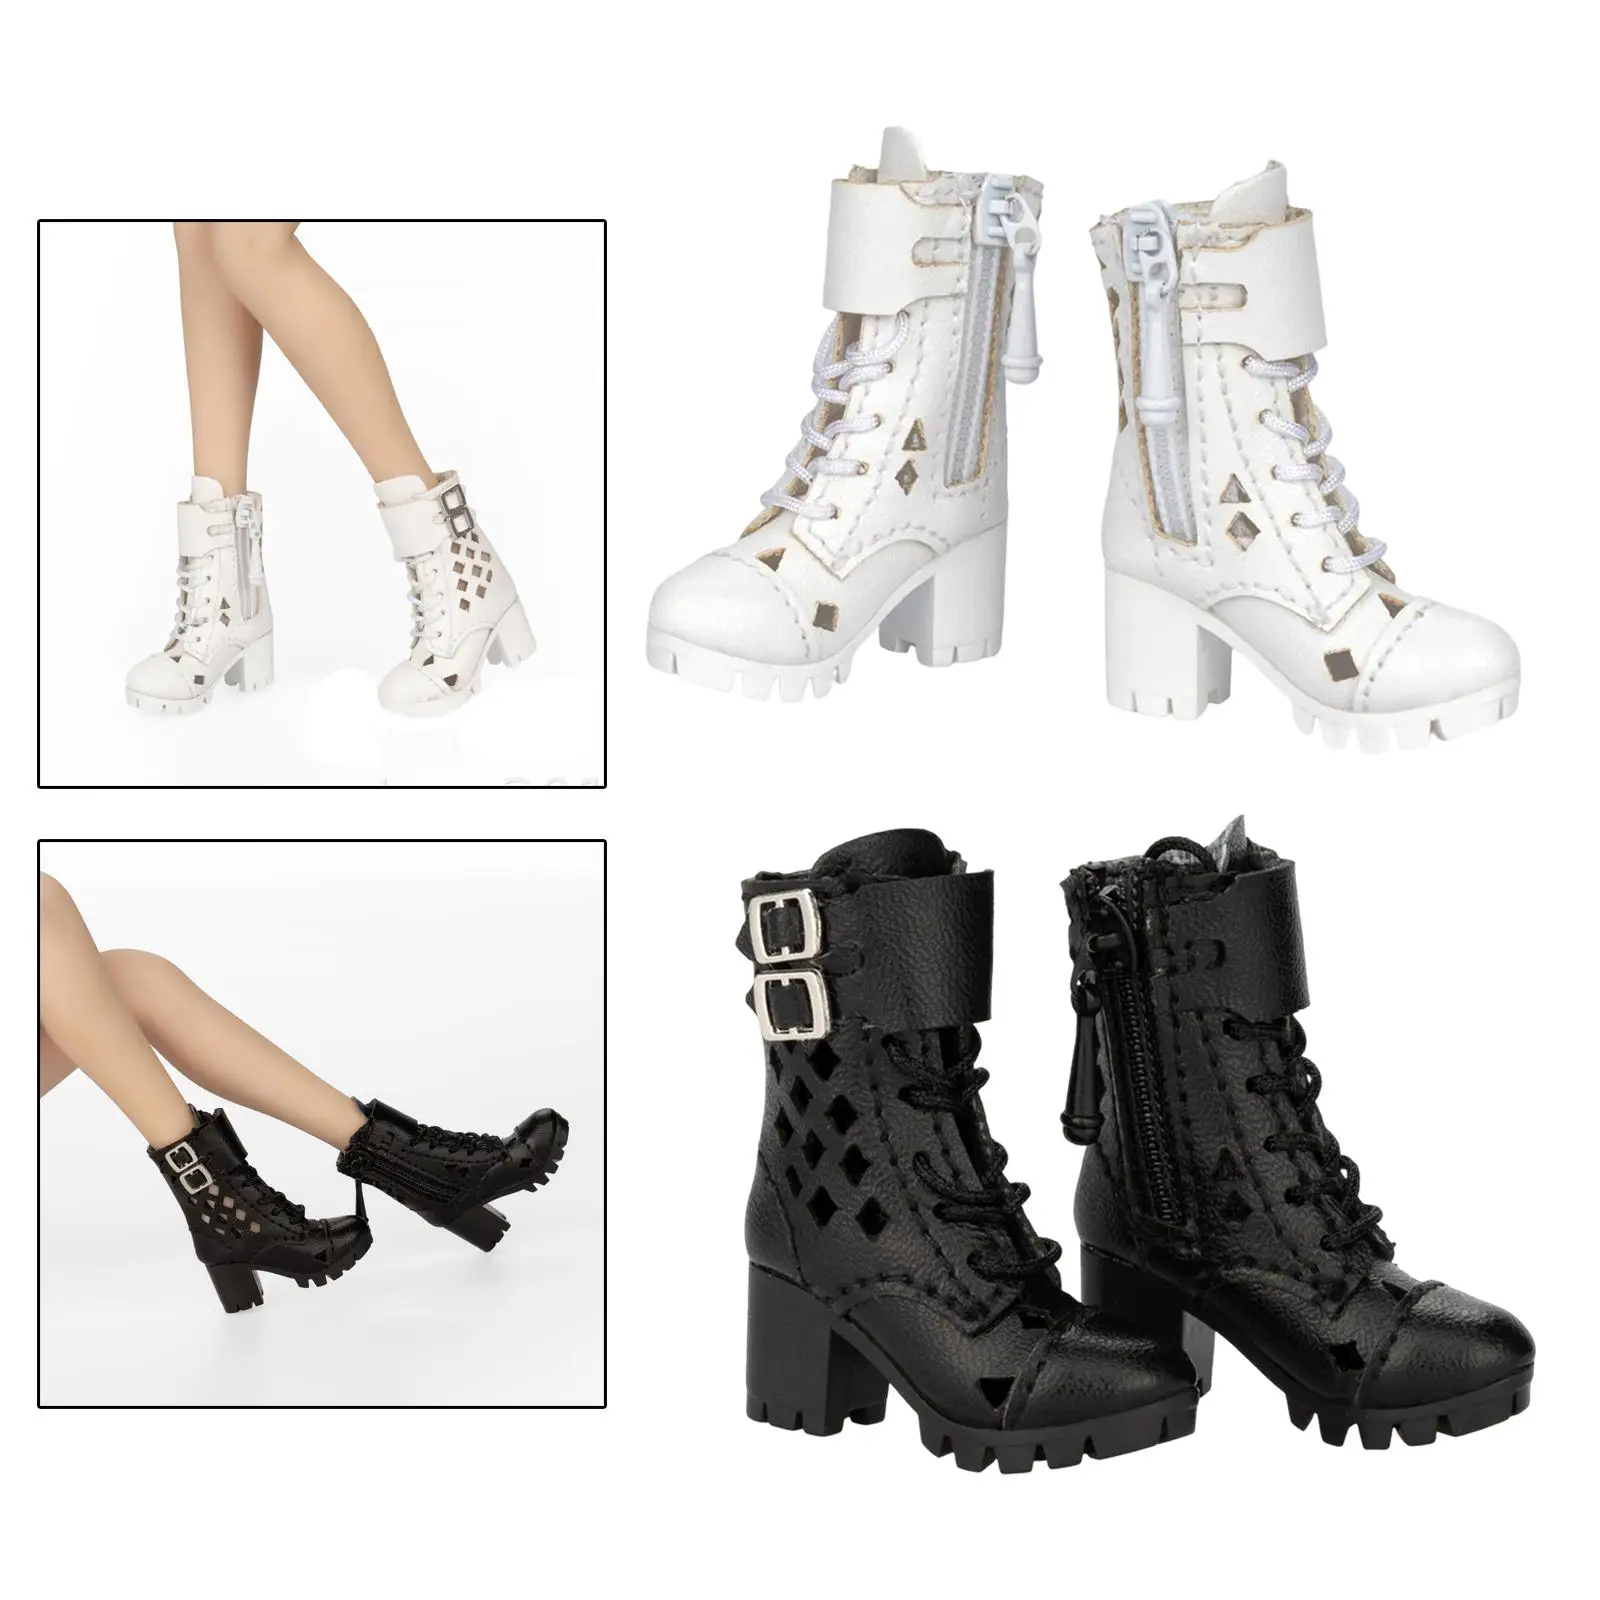 1:6 Boot  High Heeled Shoes for 12inch Female Action Figures Accessory